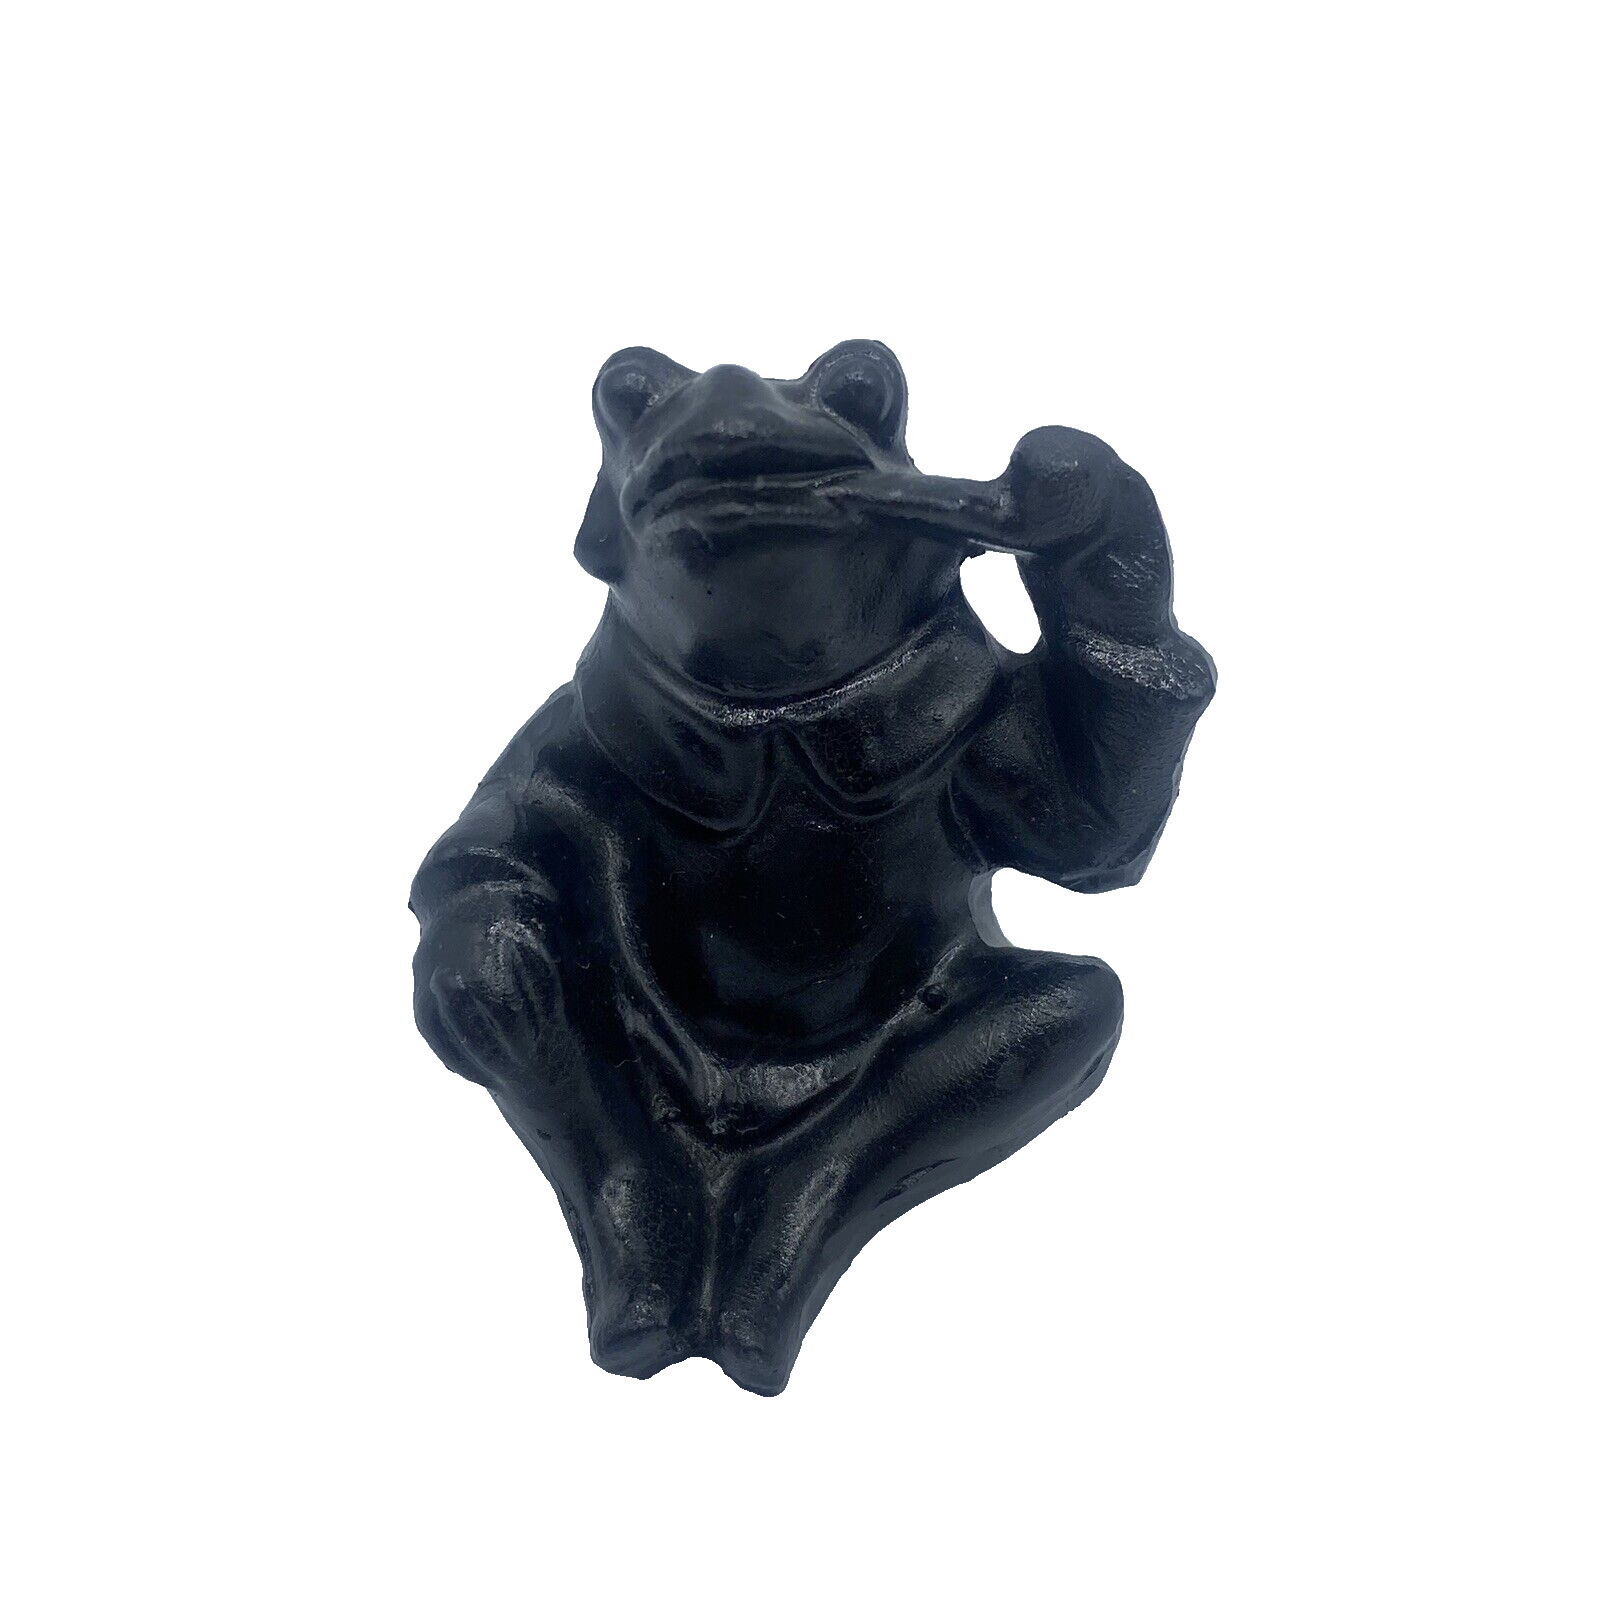 Vintage Black Frog Toad Figurine Smoking Tobacco Pipe Crafted from Coal 2.5\